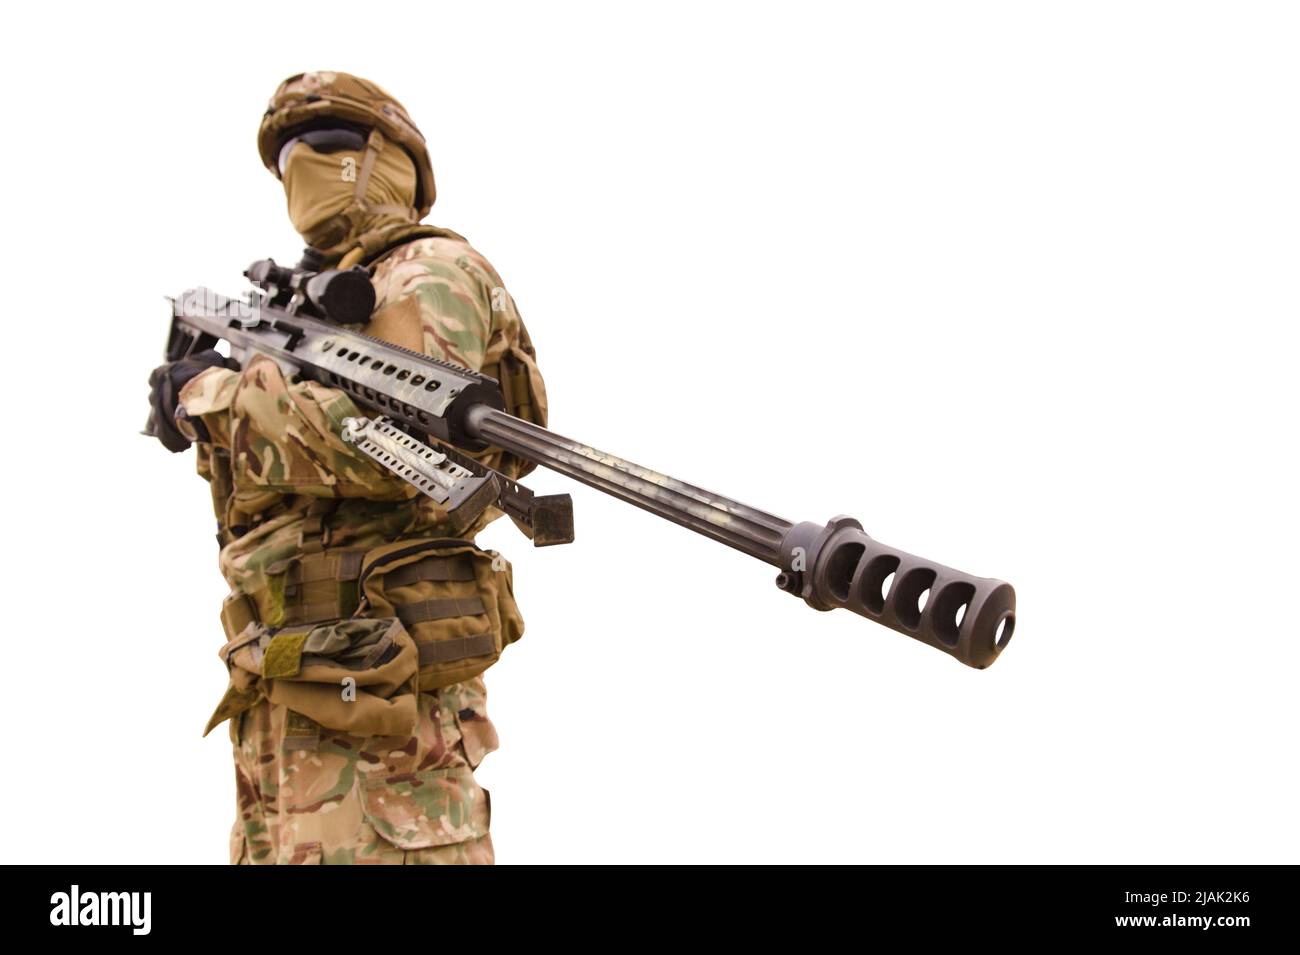 Equipped special forces soldier with sniper rifle, isolated on white background. Stock Photo